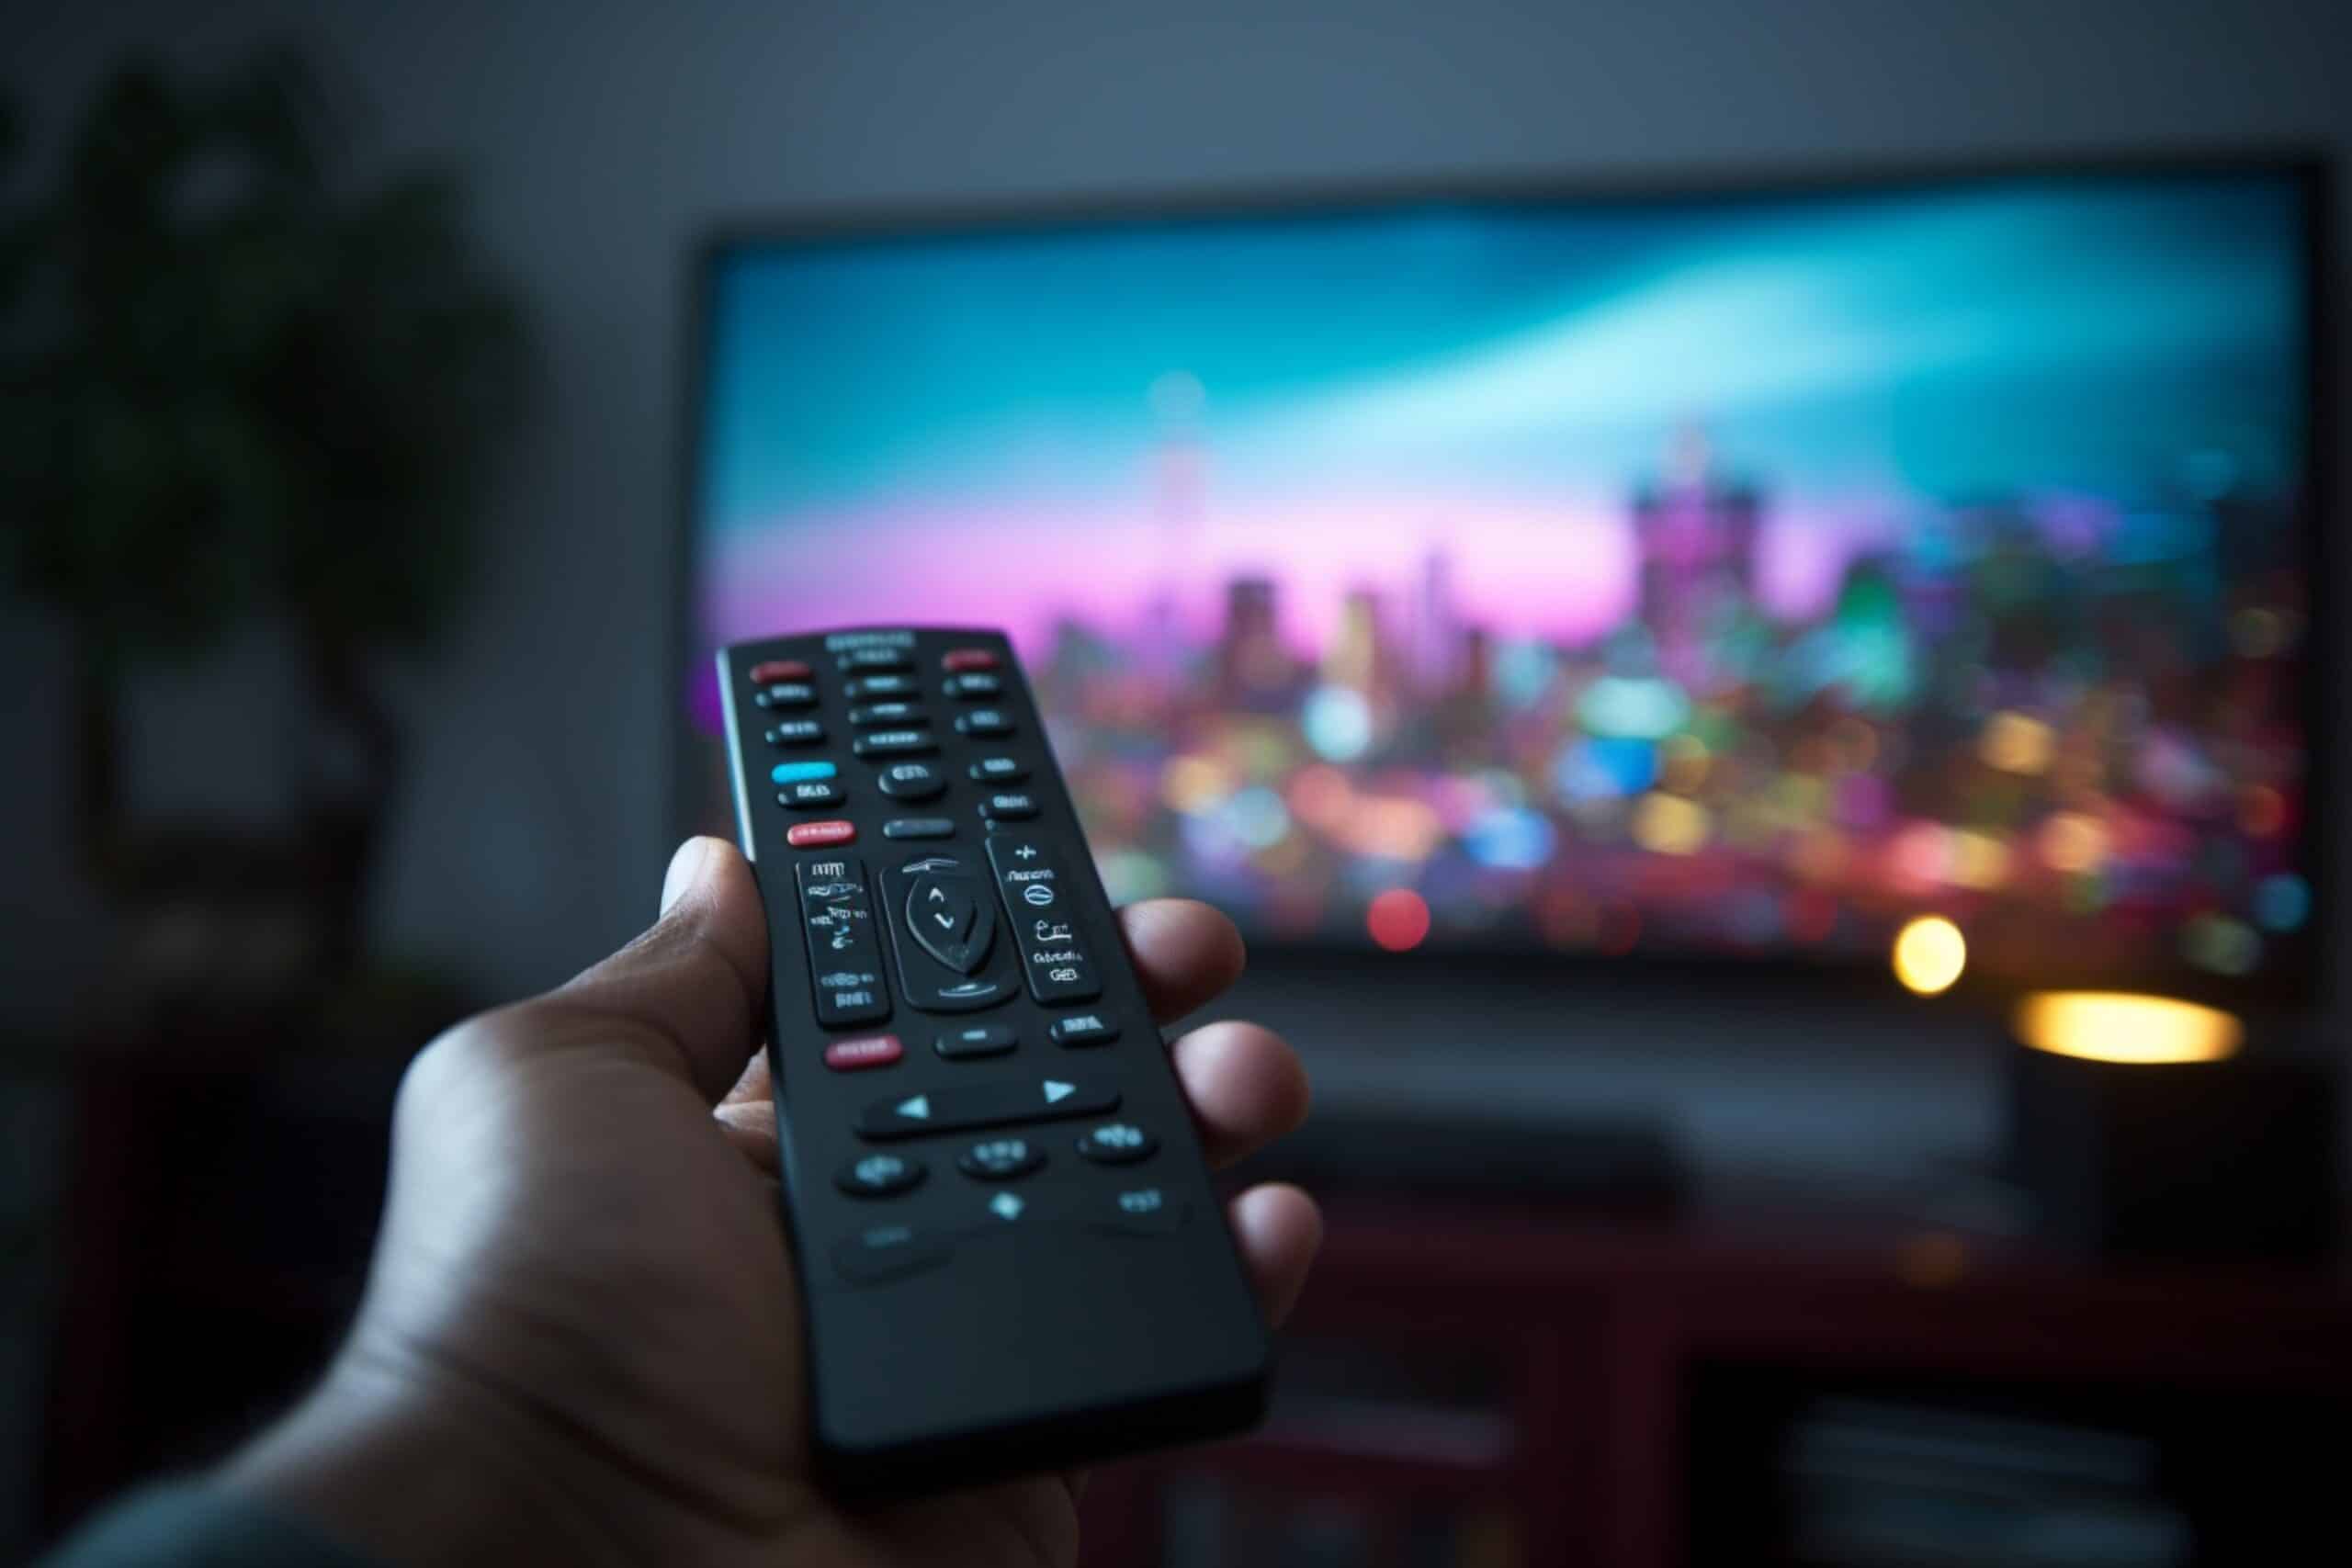 www.appr.com : How To Get Local Channels On Smart TV?